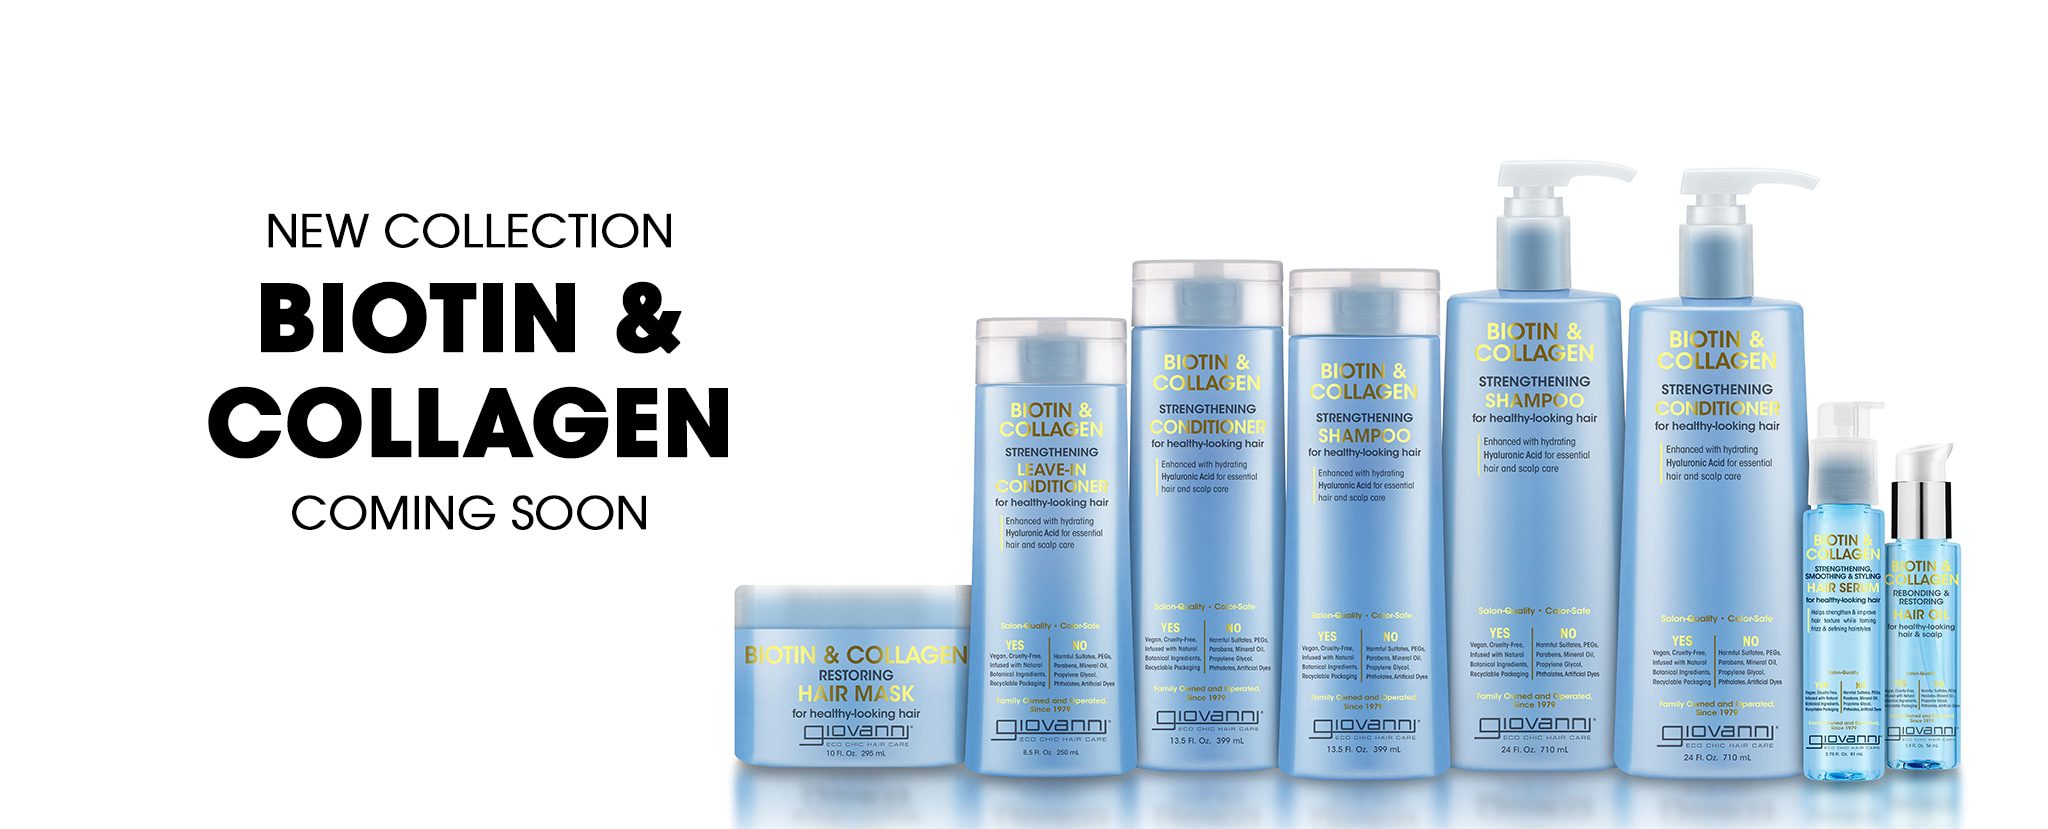 New Collection - Biotin & Collagen - Coming Soon